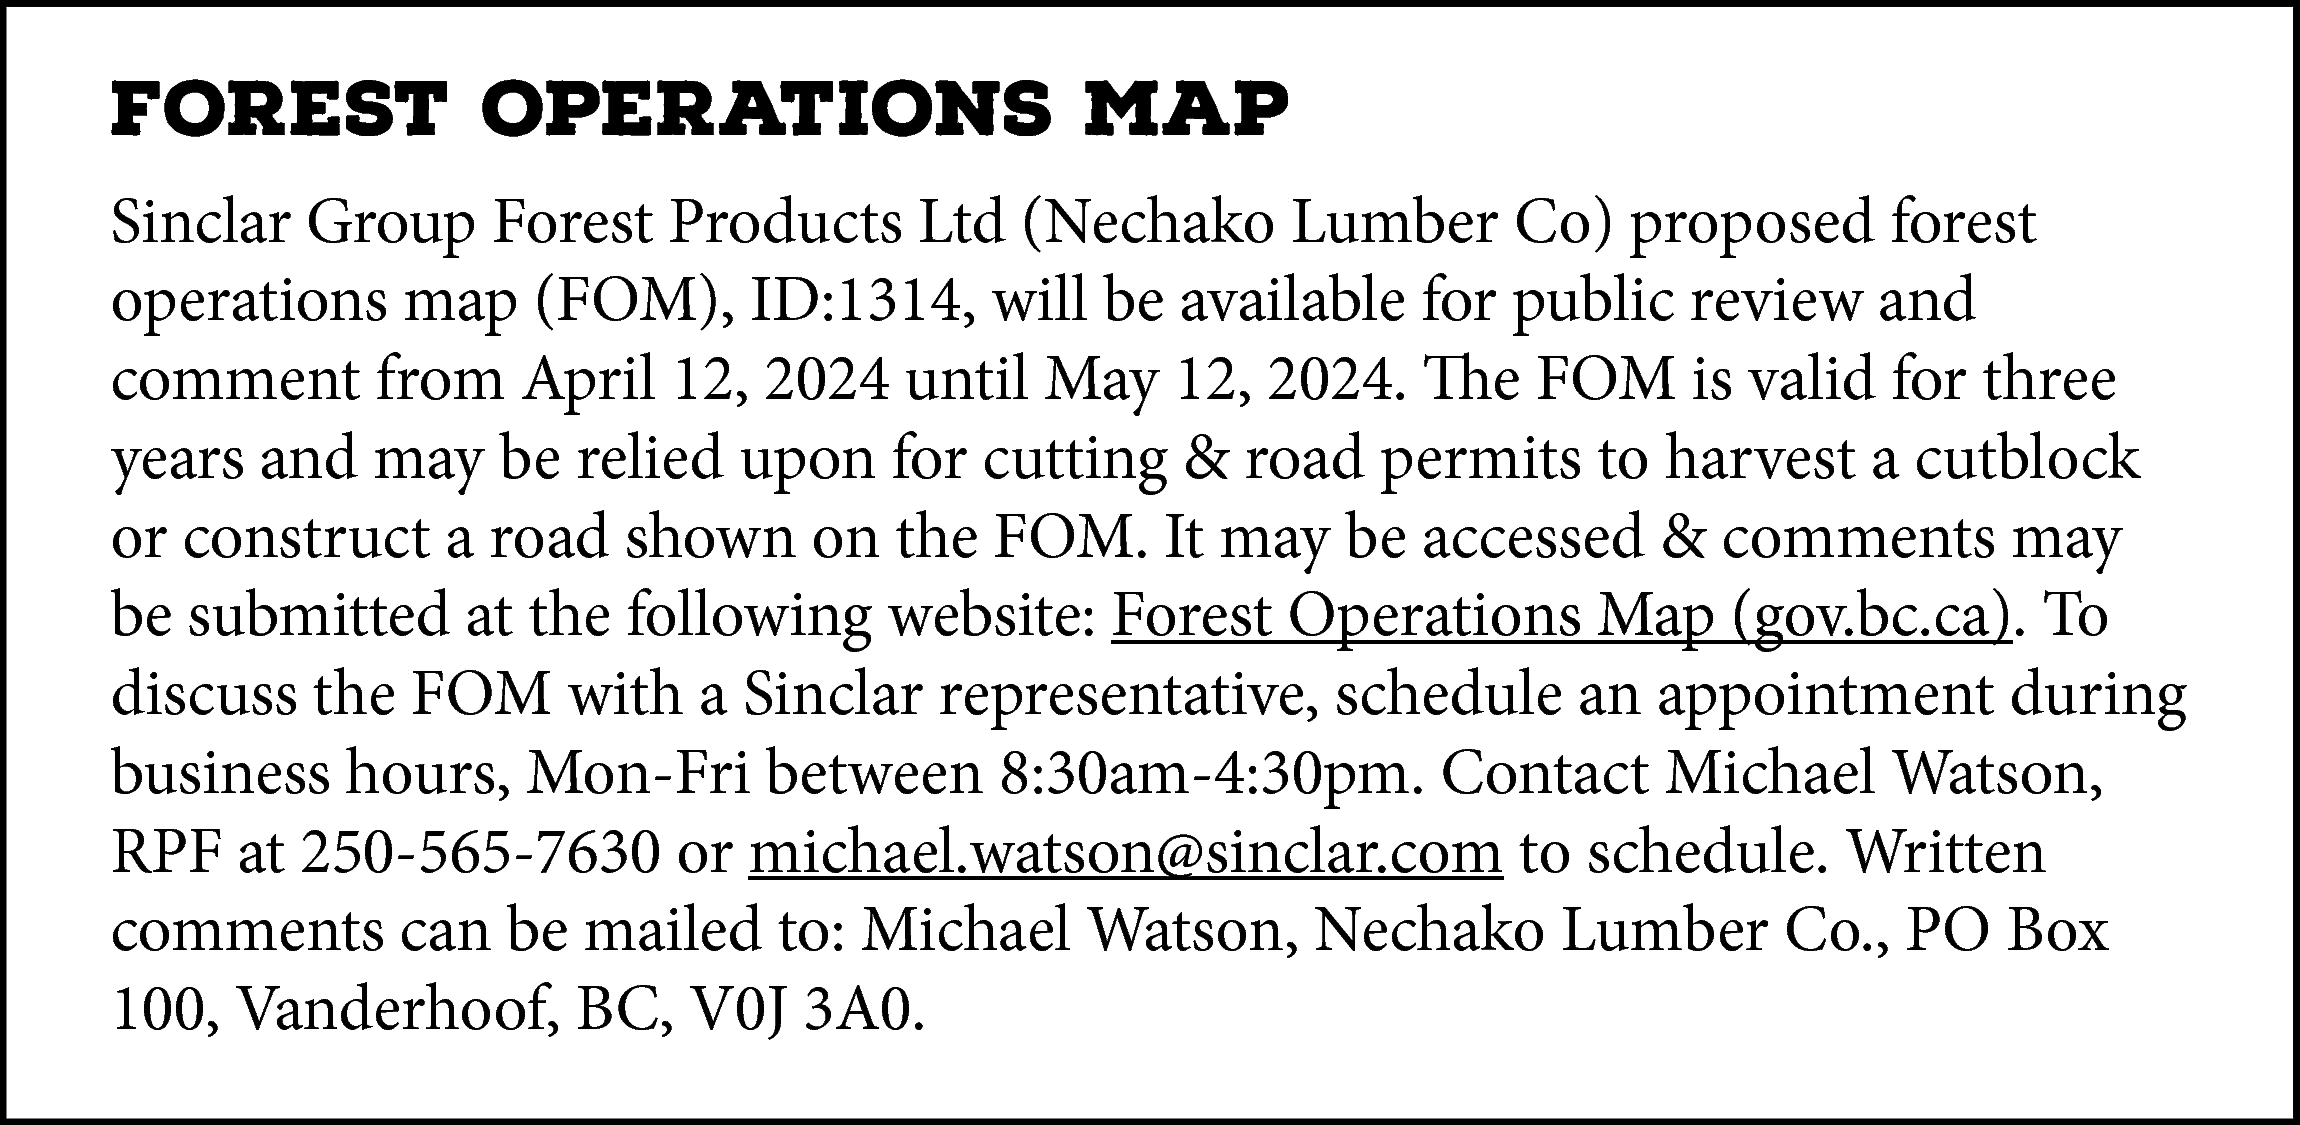 FOREST OPERATIONS MAP <br>Sinclar Group  FOREST OPERATIONS MAP  Sinclar Group Forest Products Ltd (Nechako Lumber Co) proposed forest  operations map (FOM), ID:1314, will be available for public review and  comment from April 12, 2024 until May 12, 2024. The FOM is valid for three  years and may be relied upon for cutting & road permits to harvest a cutblock  or construct a road shown on the FOM. It may be accessed & comments may  https://www2.gov.bc.ca/gov/content/home  be submitted at the following website: Forest Operations  Map (gov.bc.ca). To  discuss the FOM with a Sinclar representative, schedule an appointment during  business hours, Mon-Fri between 8:30am-4:30pm. Contact Michael Watson,  RPF at 250-565-7630 or michael.watson@sinclar.com to schedule. Written  comments can be mailed to: Michael Watson, Nechako Lumber Co., PO Box  100, Vanderhoof, BC, V0J 3A0.    